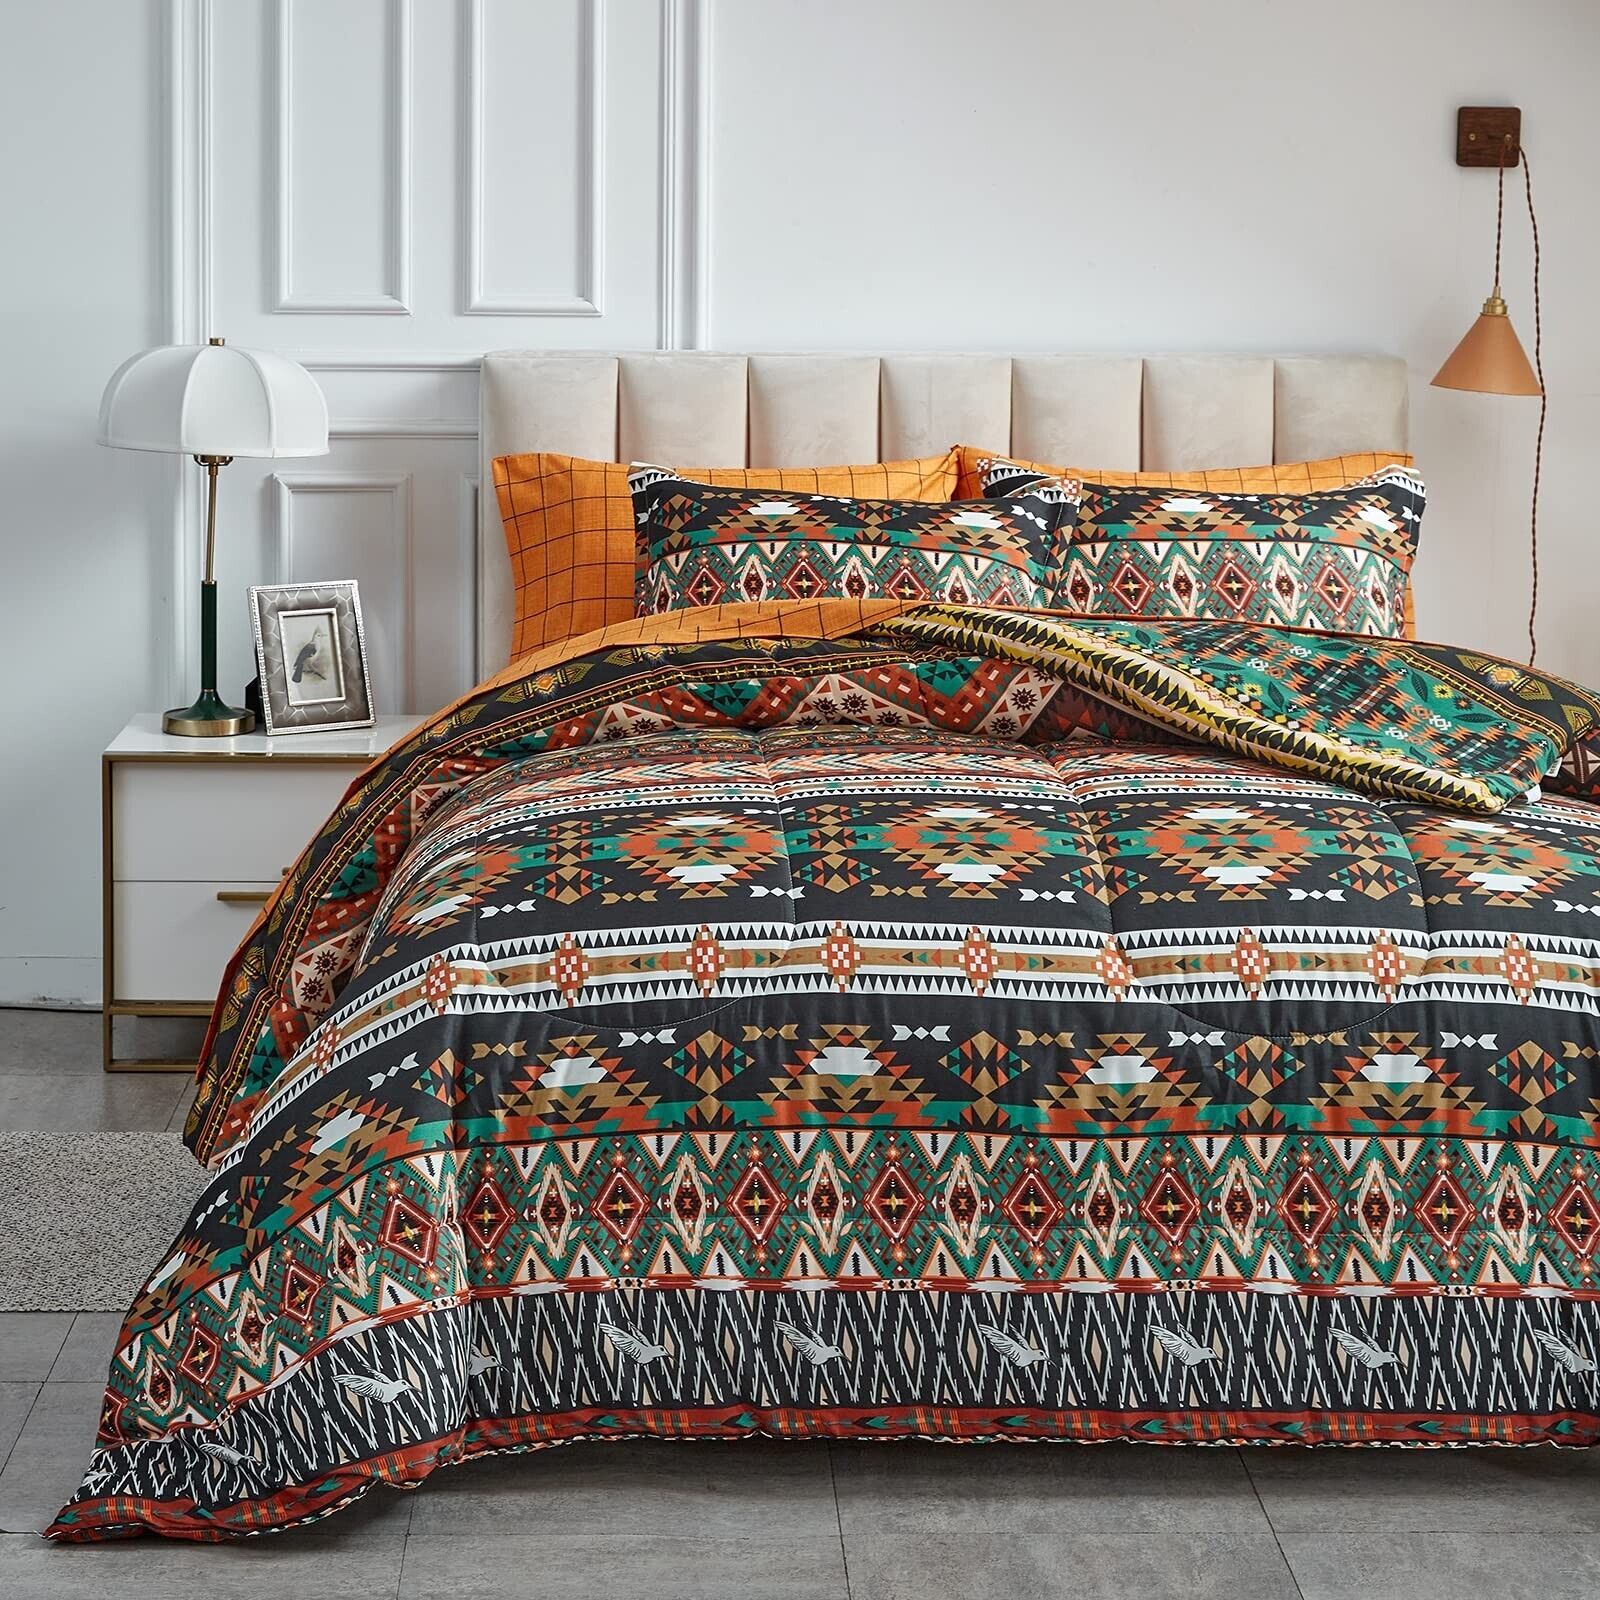 7 Pieces Boho Bed In A Bag Queen Size, Southwestern Bohemian Tribal ... - $97.84